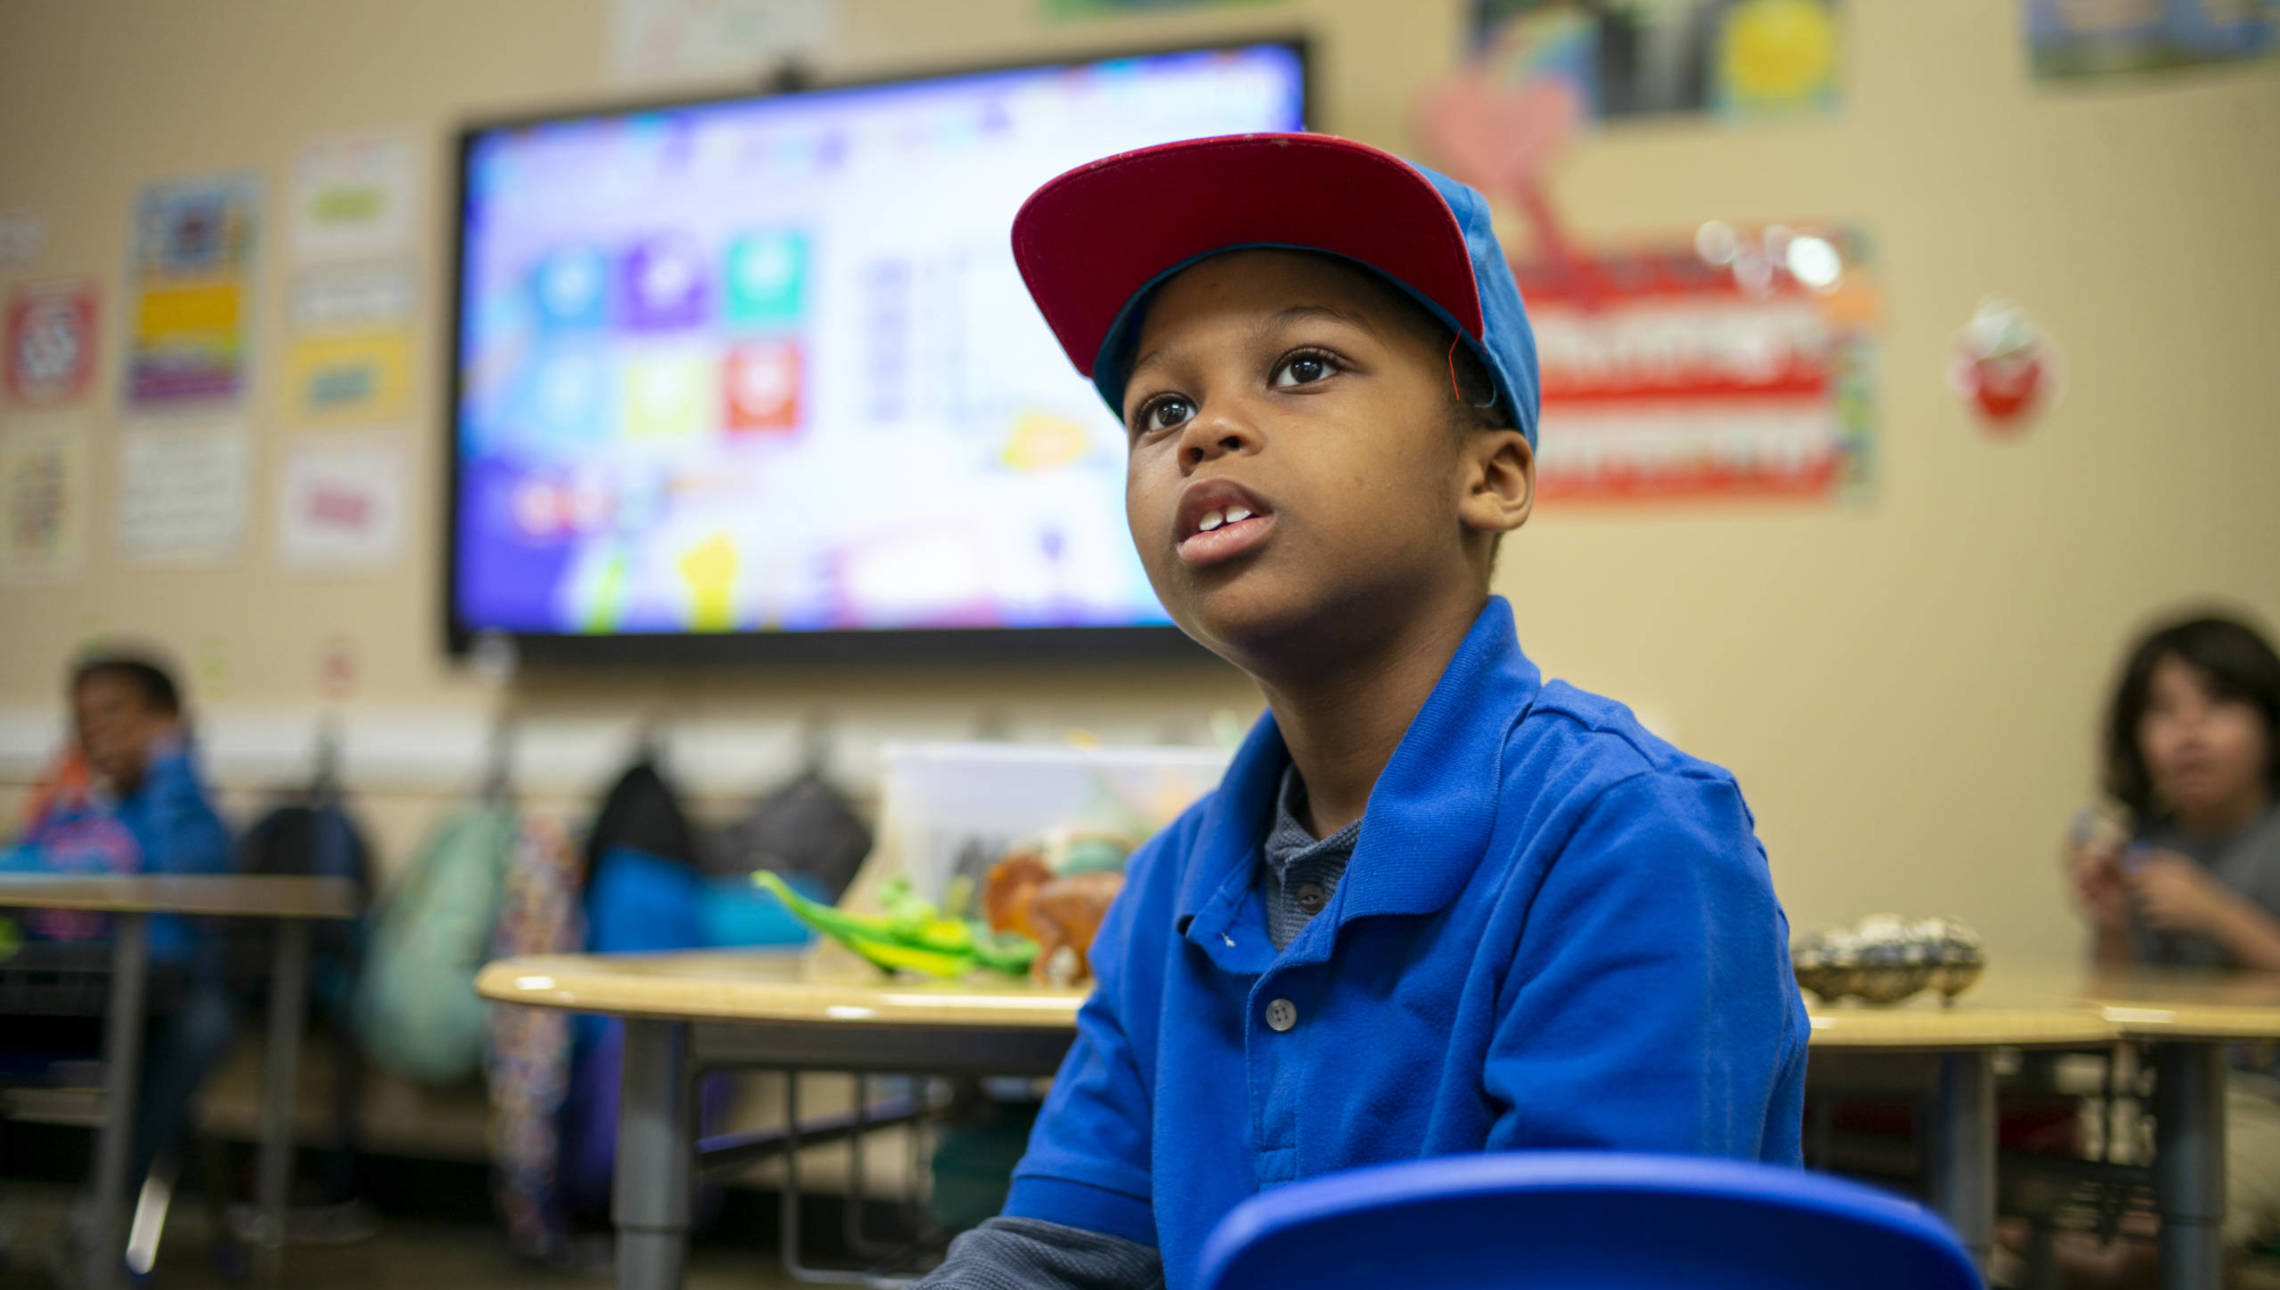 Boy in blue shirt with hat on looking at teacher